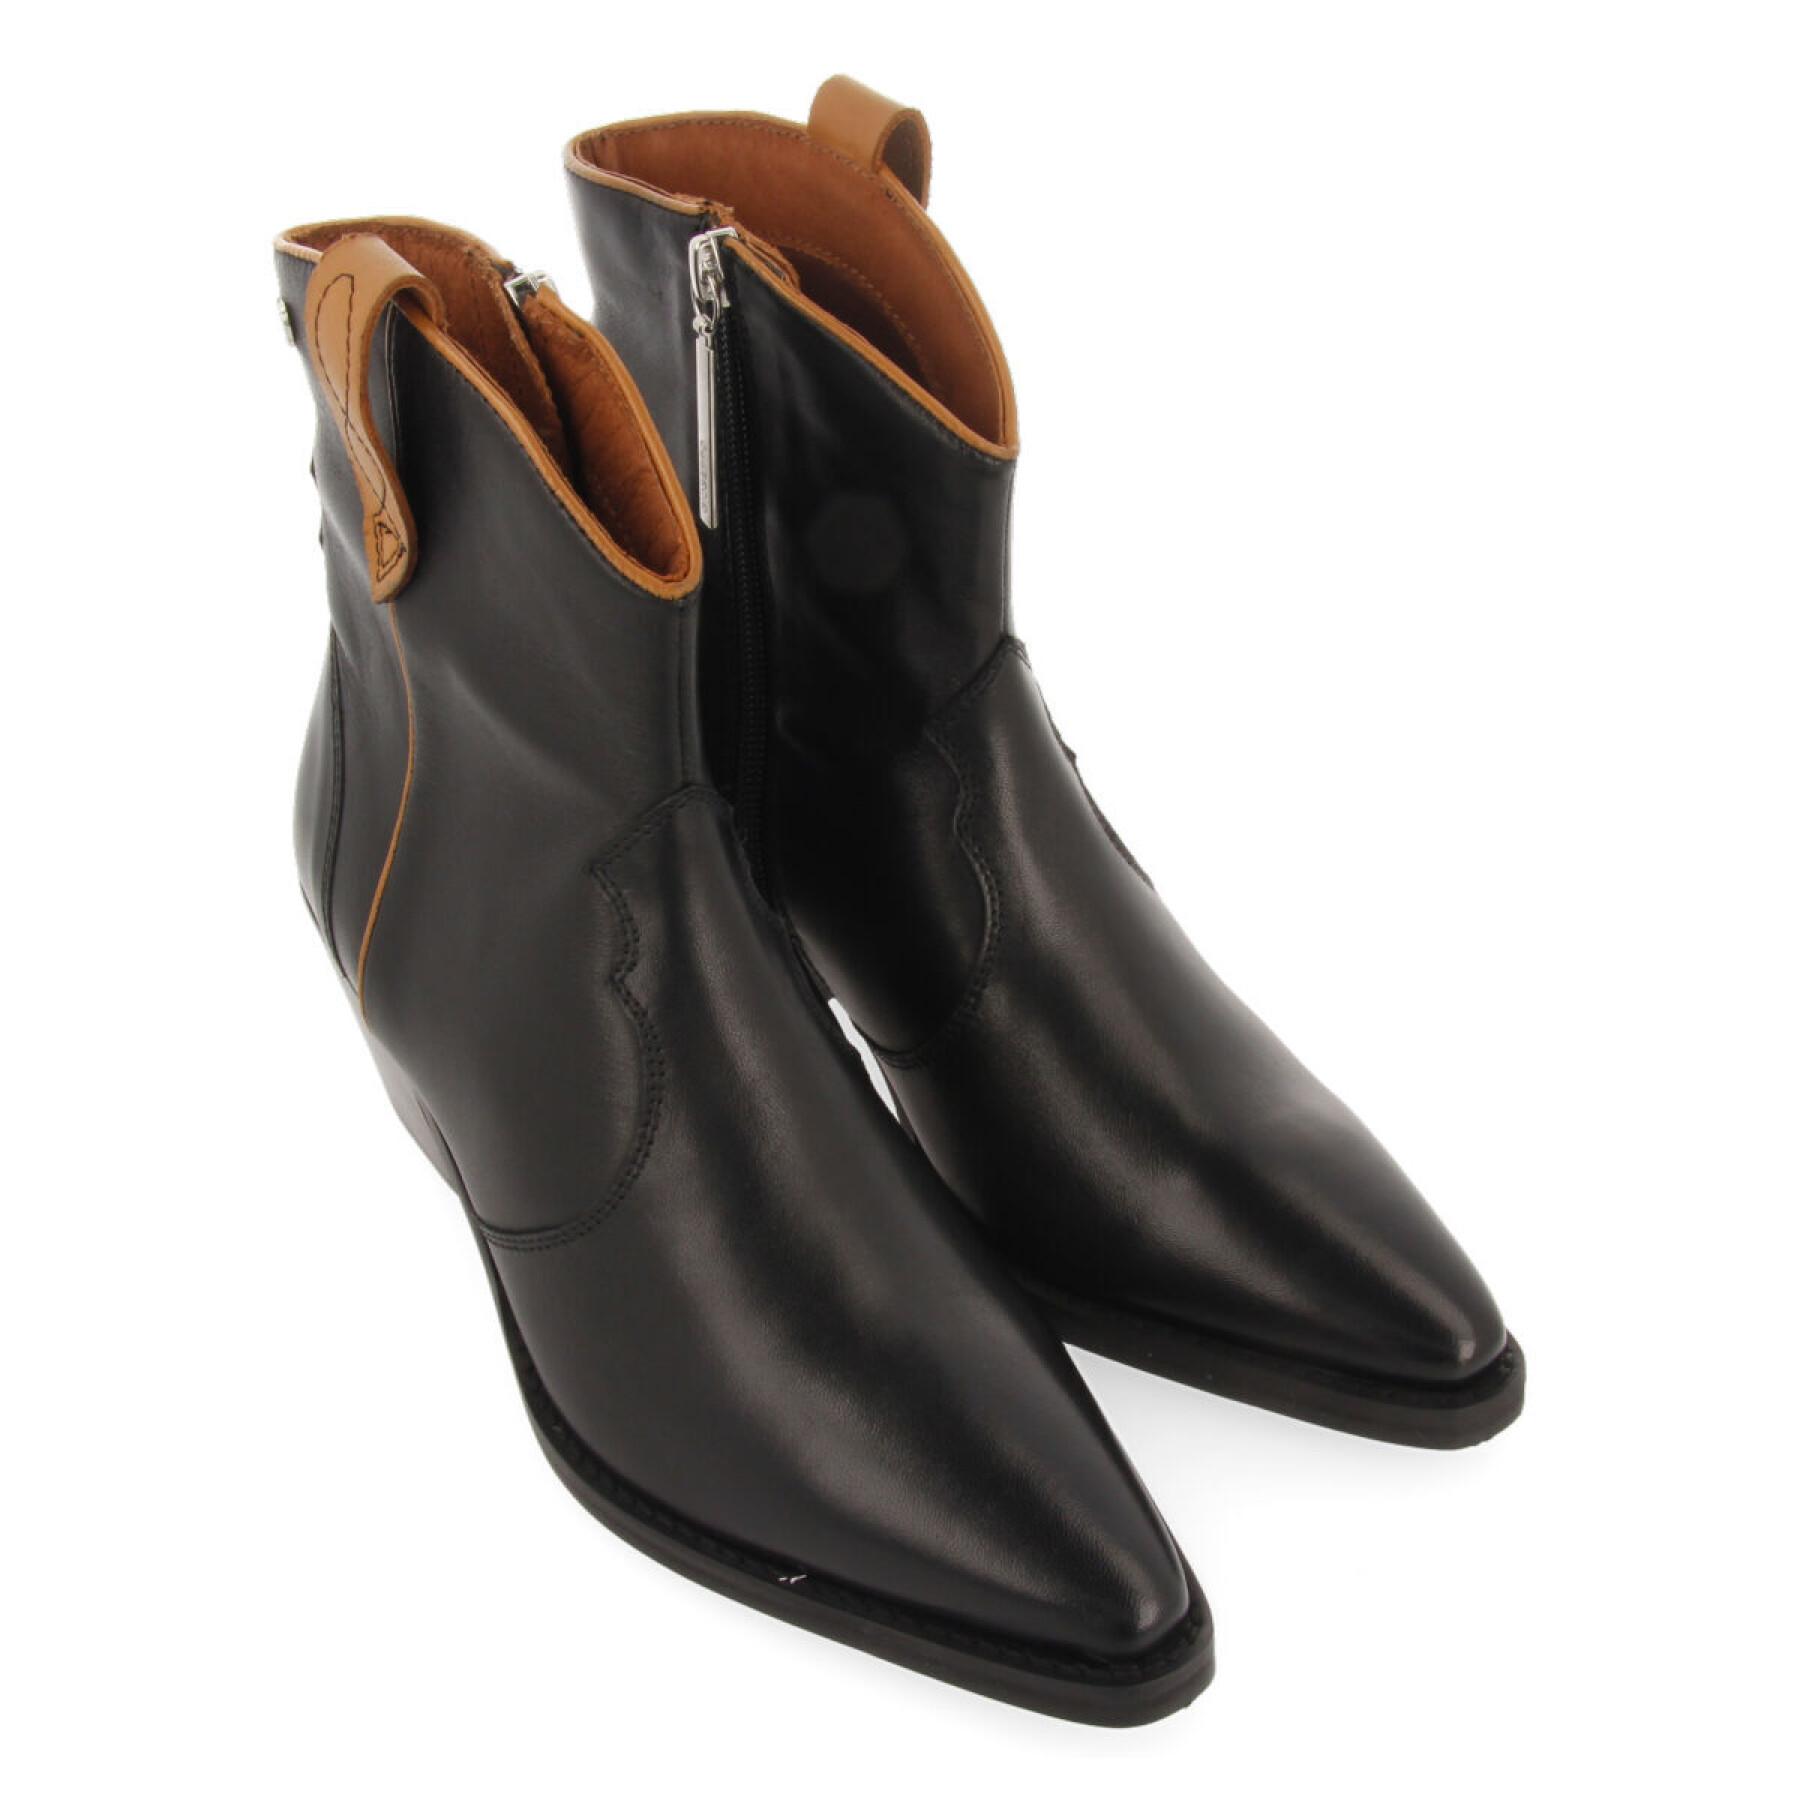 Women's boots Gioseppo Sylte